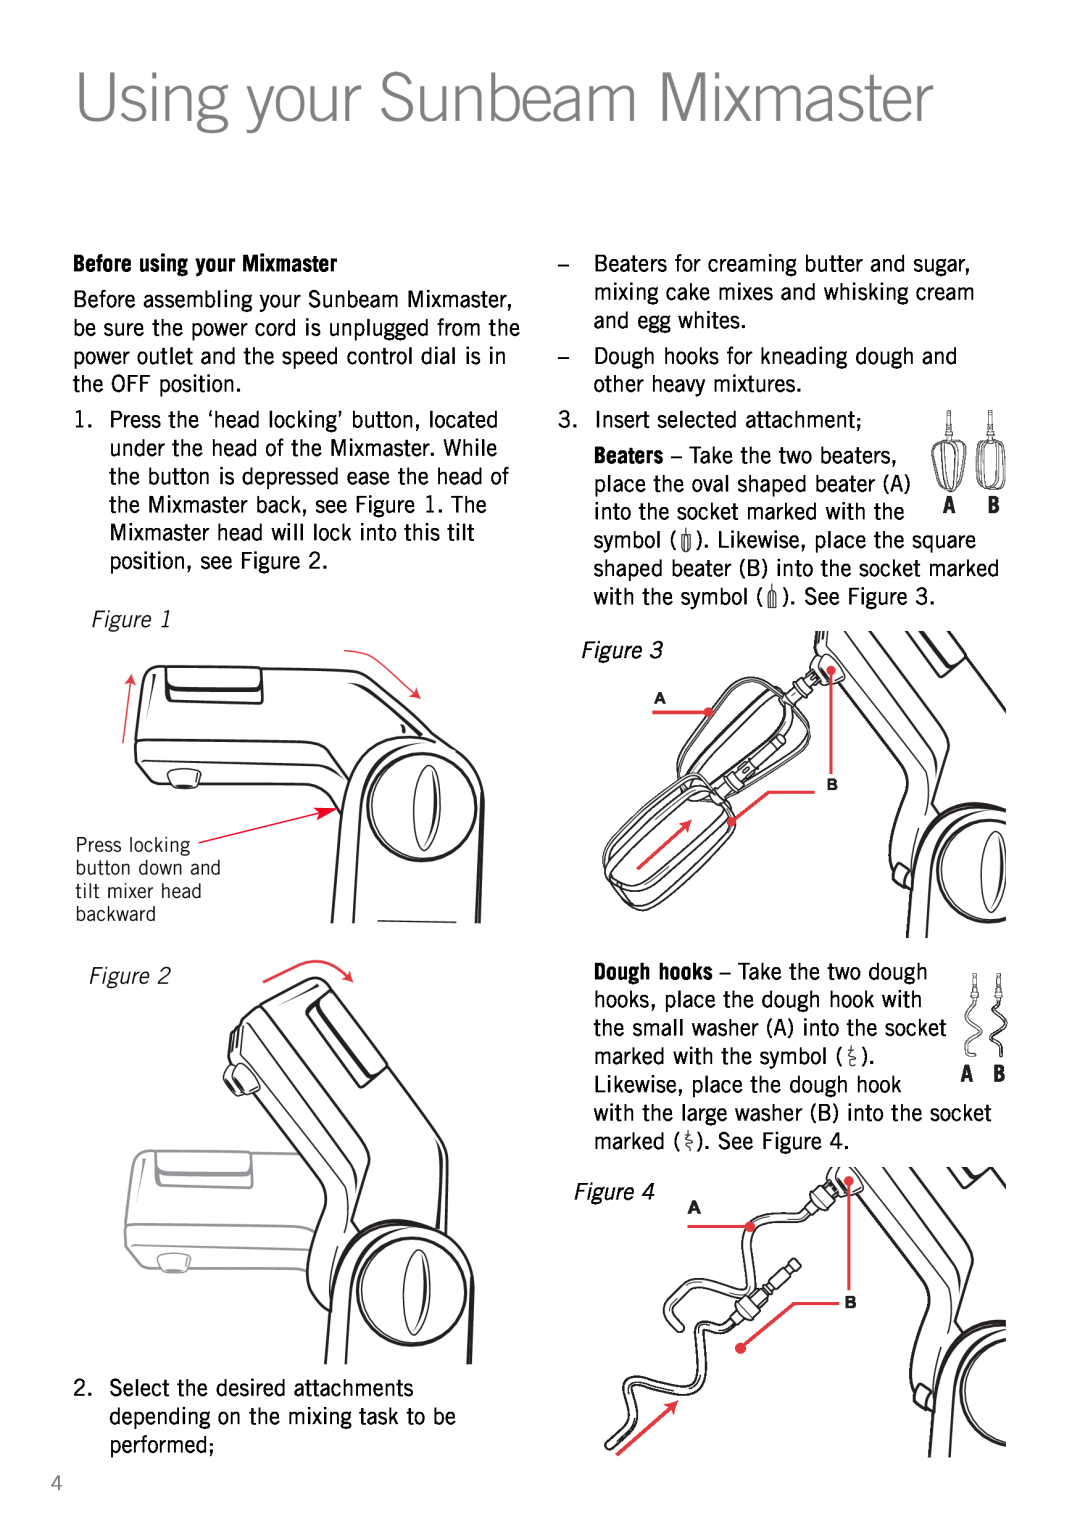 Sunbeam MX001 manual Using your Sunbeam Mixmaster, Before using your Mixmaster, Dough hooks - Take the two dough 